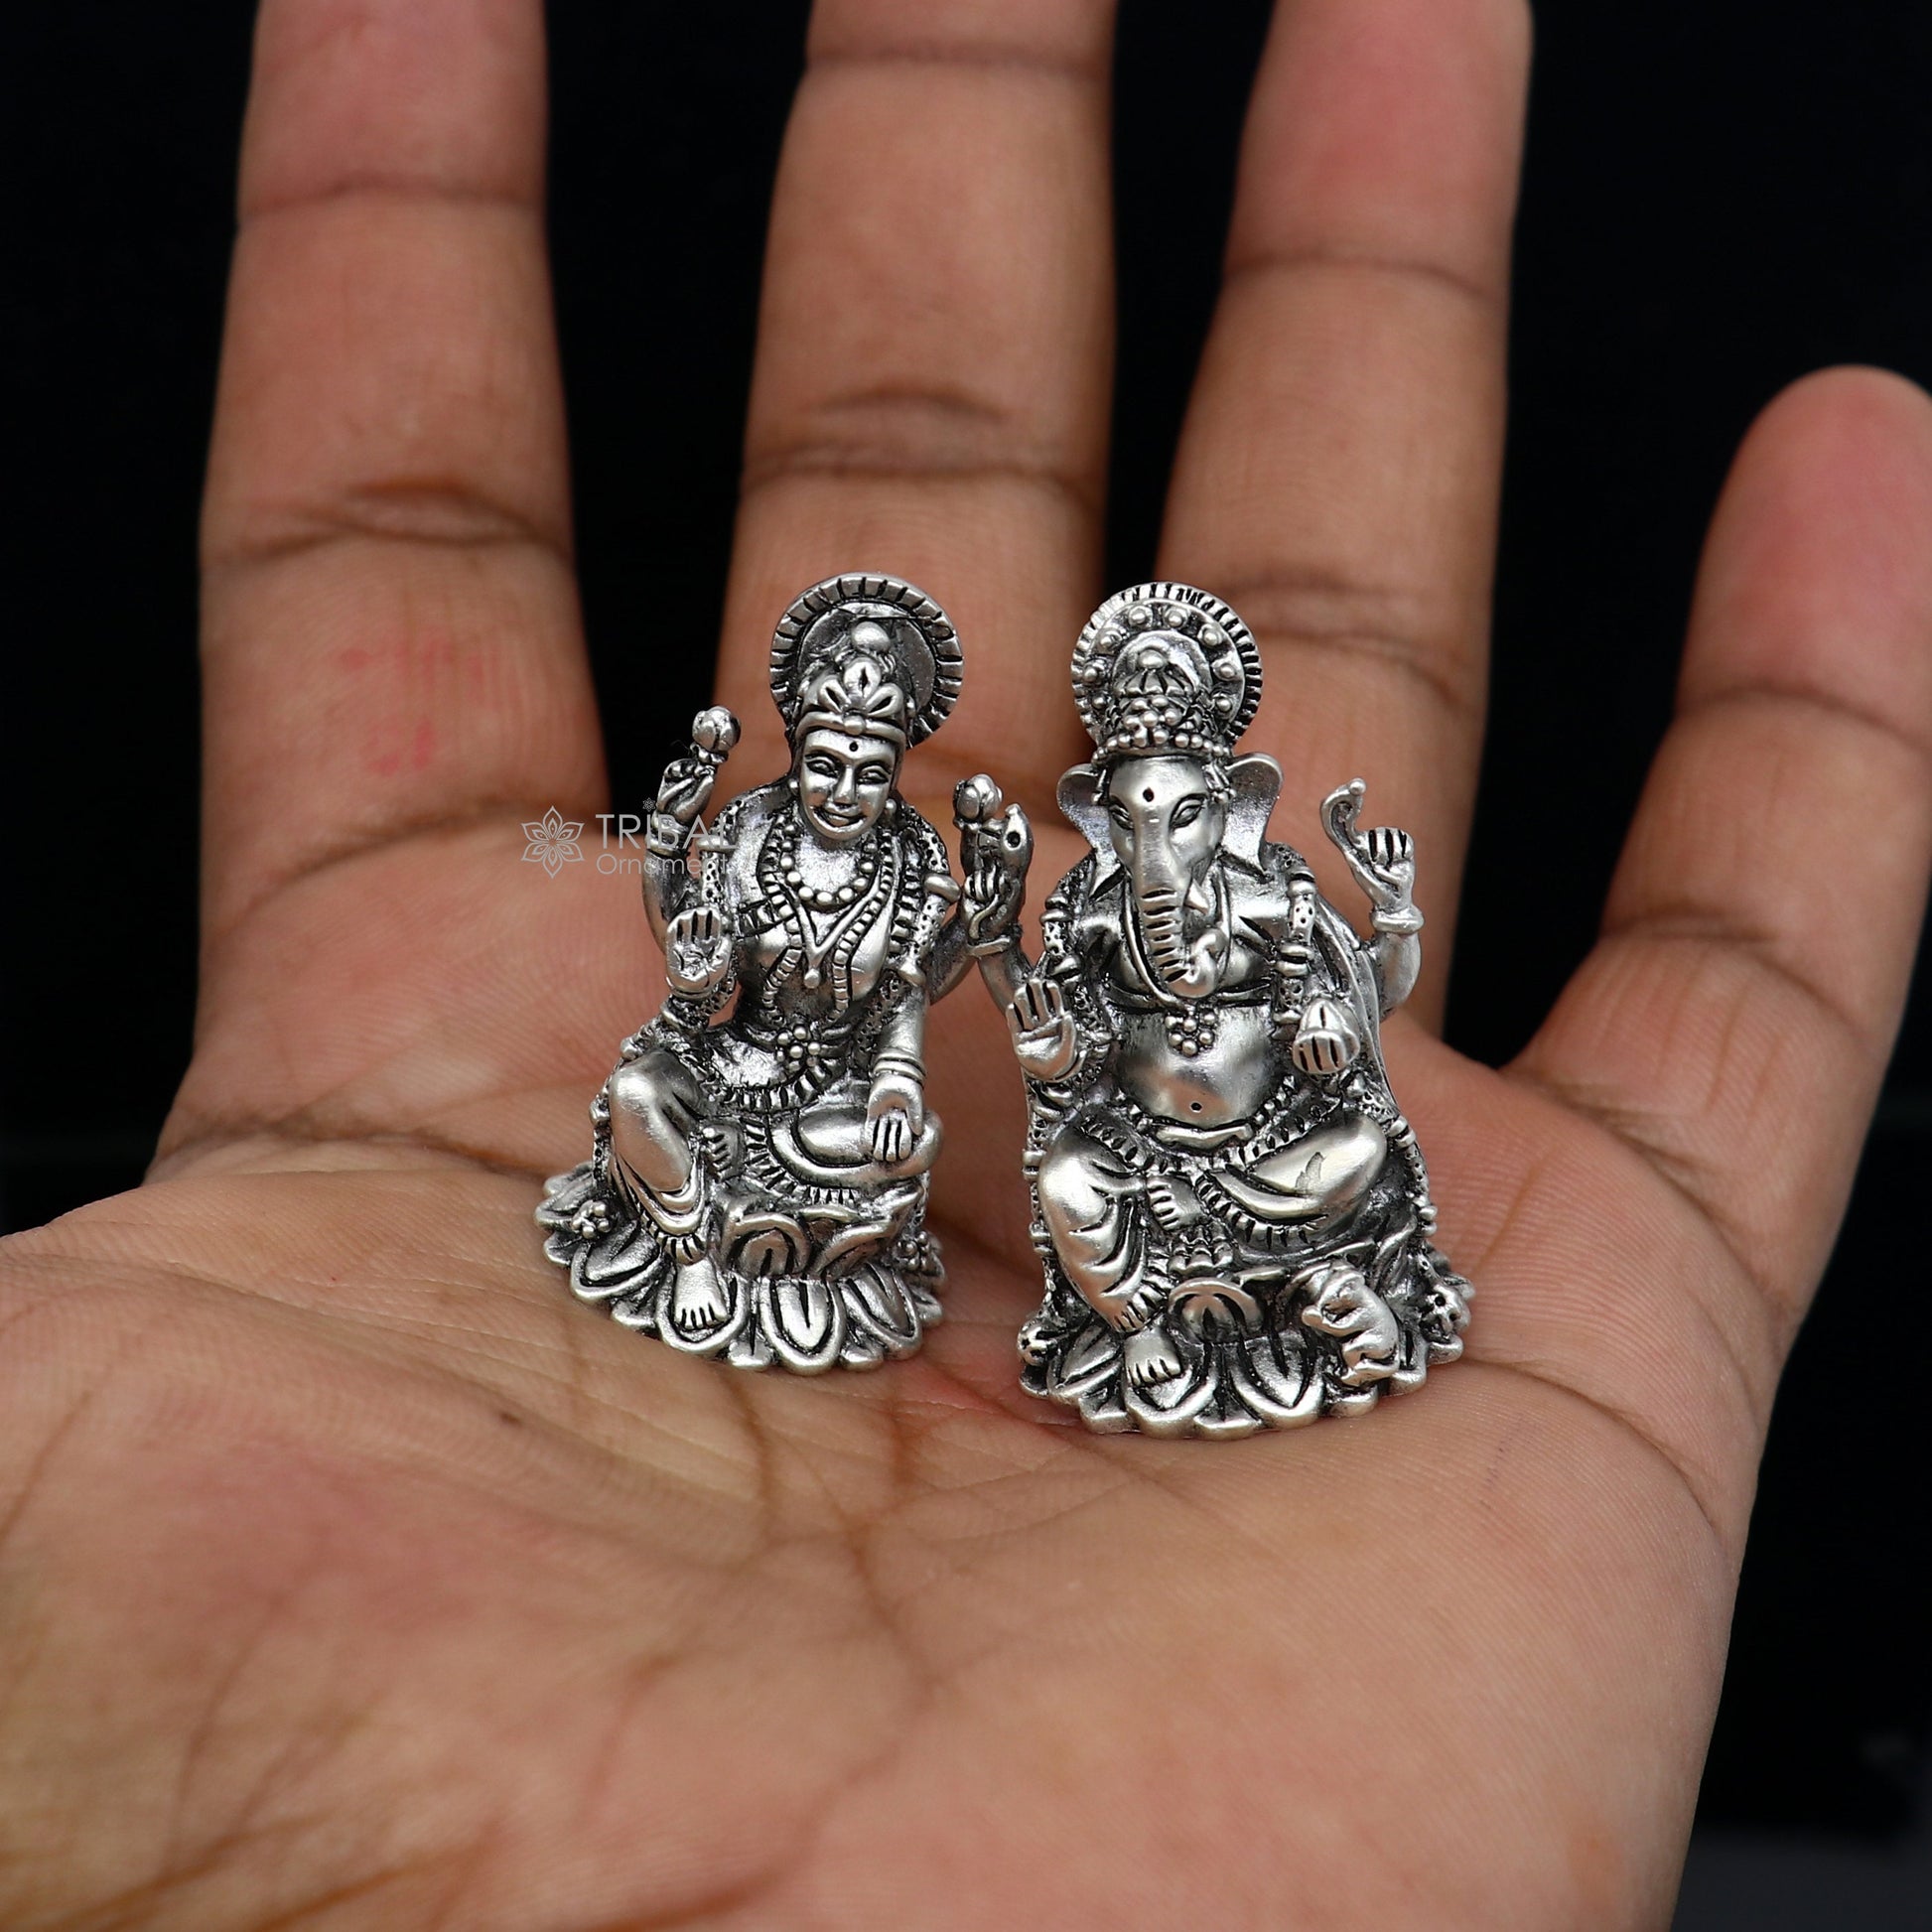 1.5" 925 Sterling silver Lakshmi and Ganesha statue, puja article figurine, Diwali puja brings joy, hope, and wealth to the owners art720 - TRIBAL ORNAMENTS